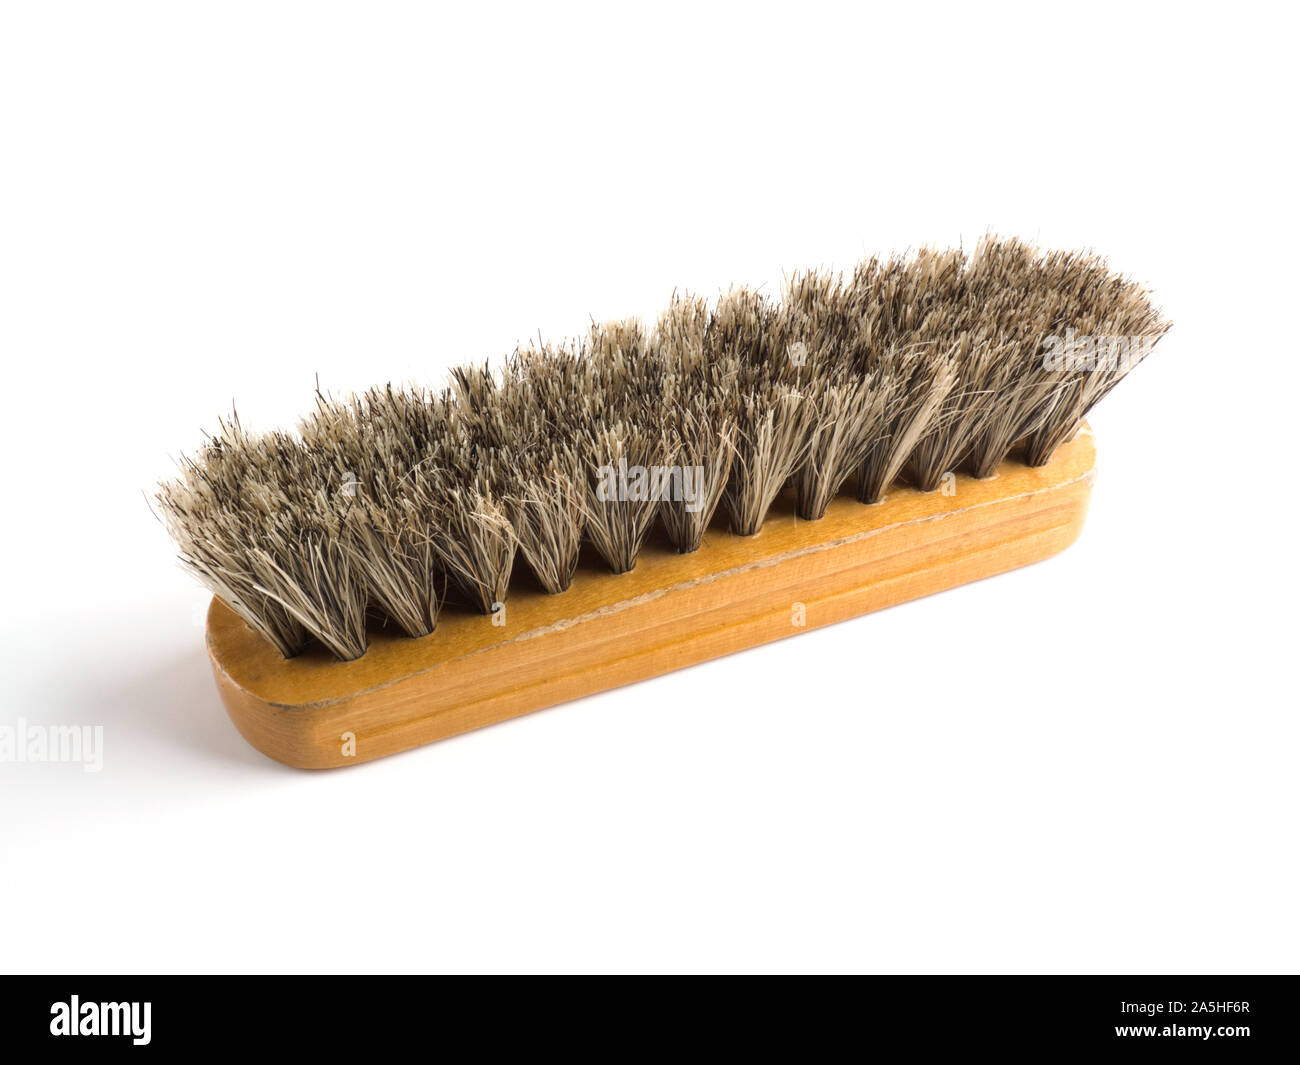 Clothes brush on a white background, hair up Stock Photo